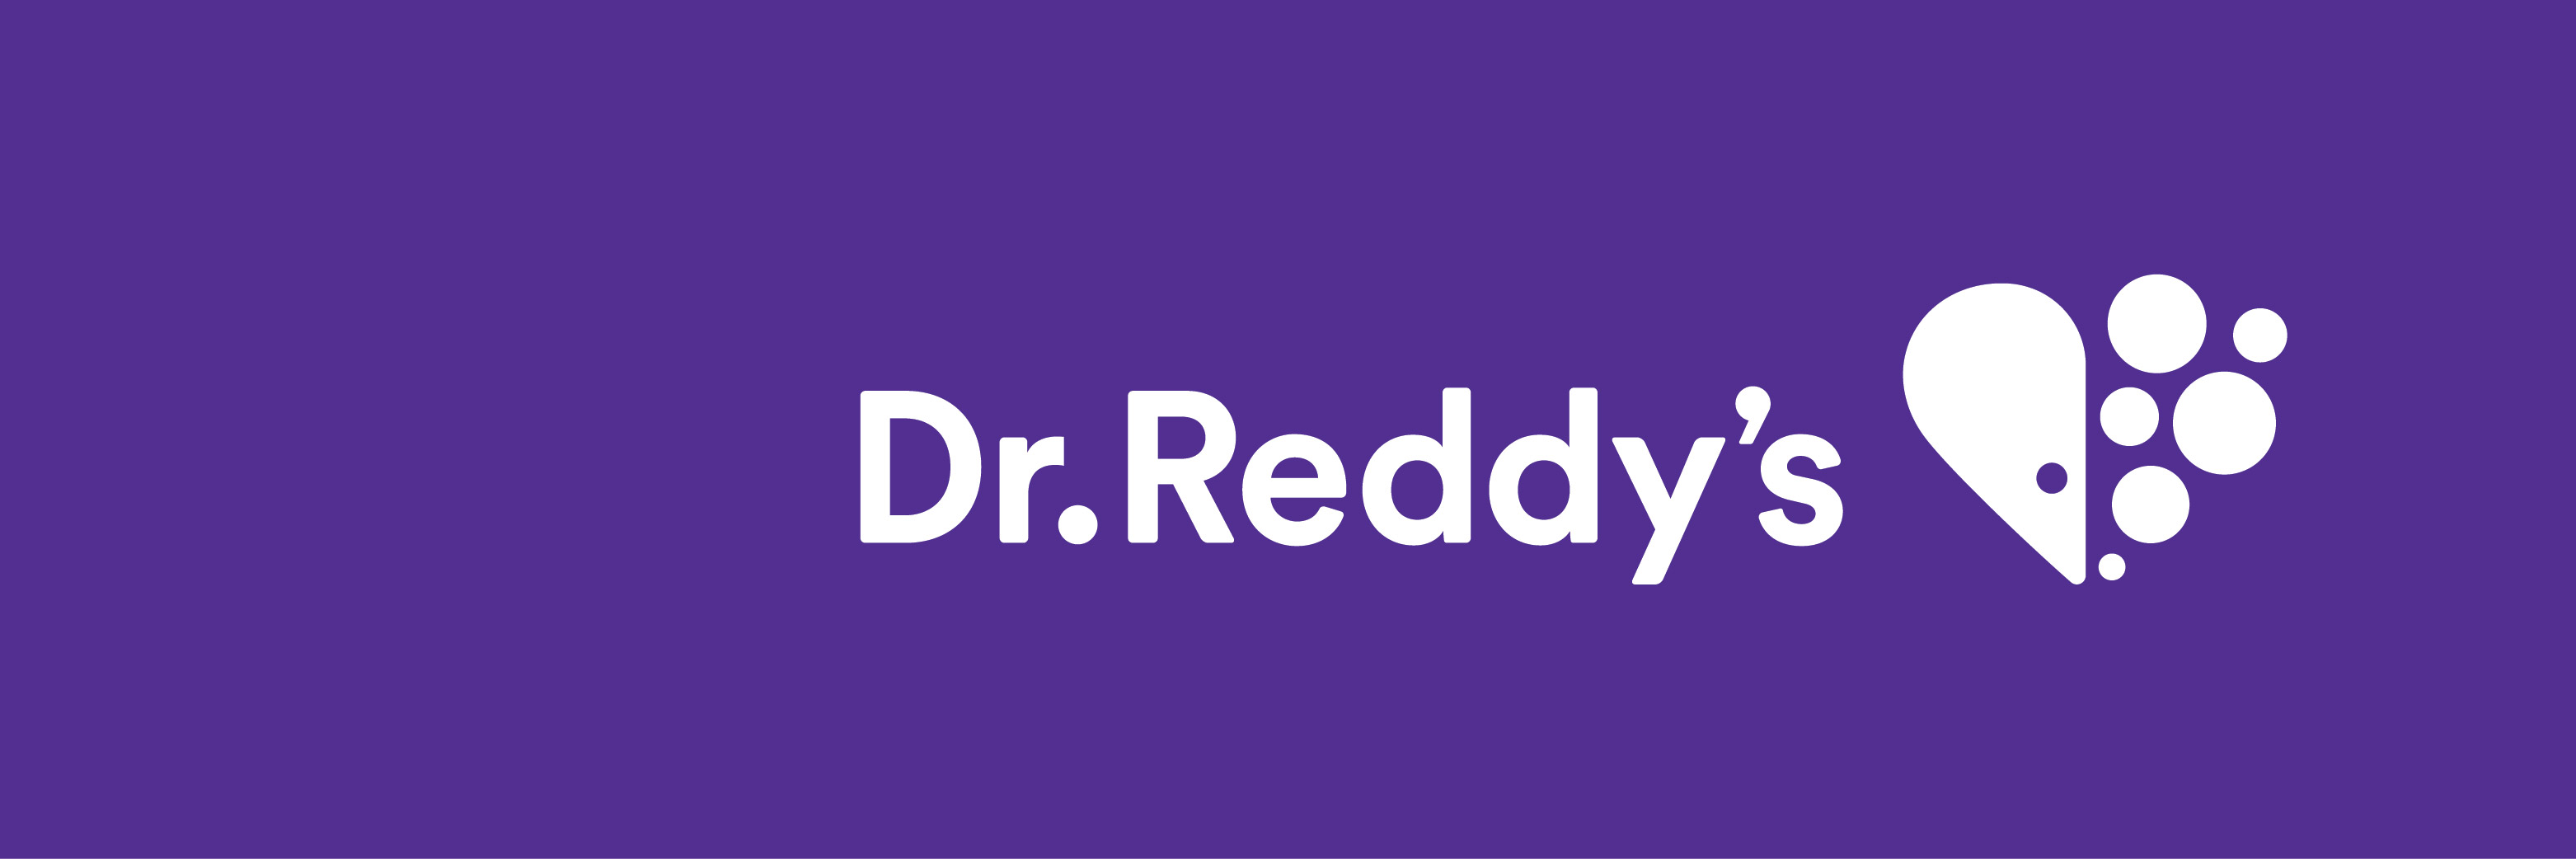 'Dr Reddy's expects Sputnik V vaccine to get approval from Indian regulator in next few weeks'